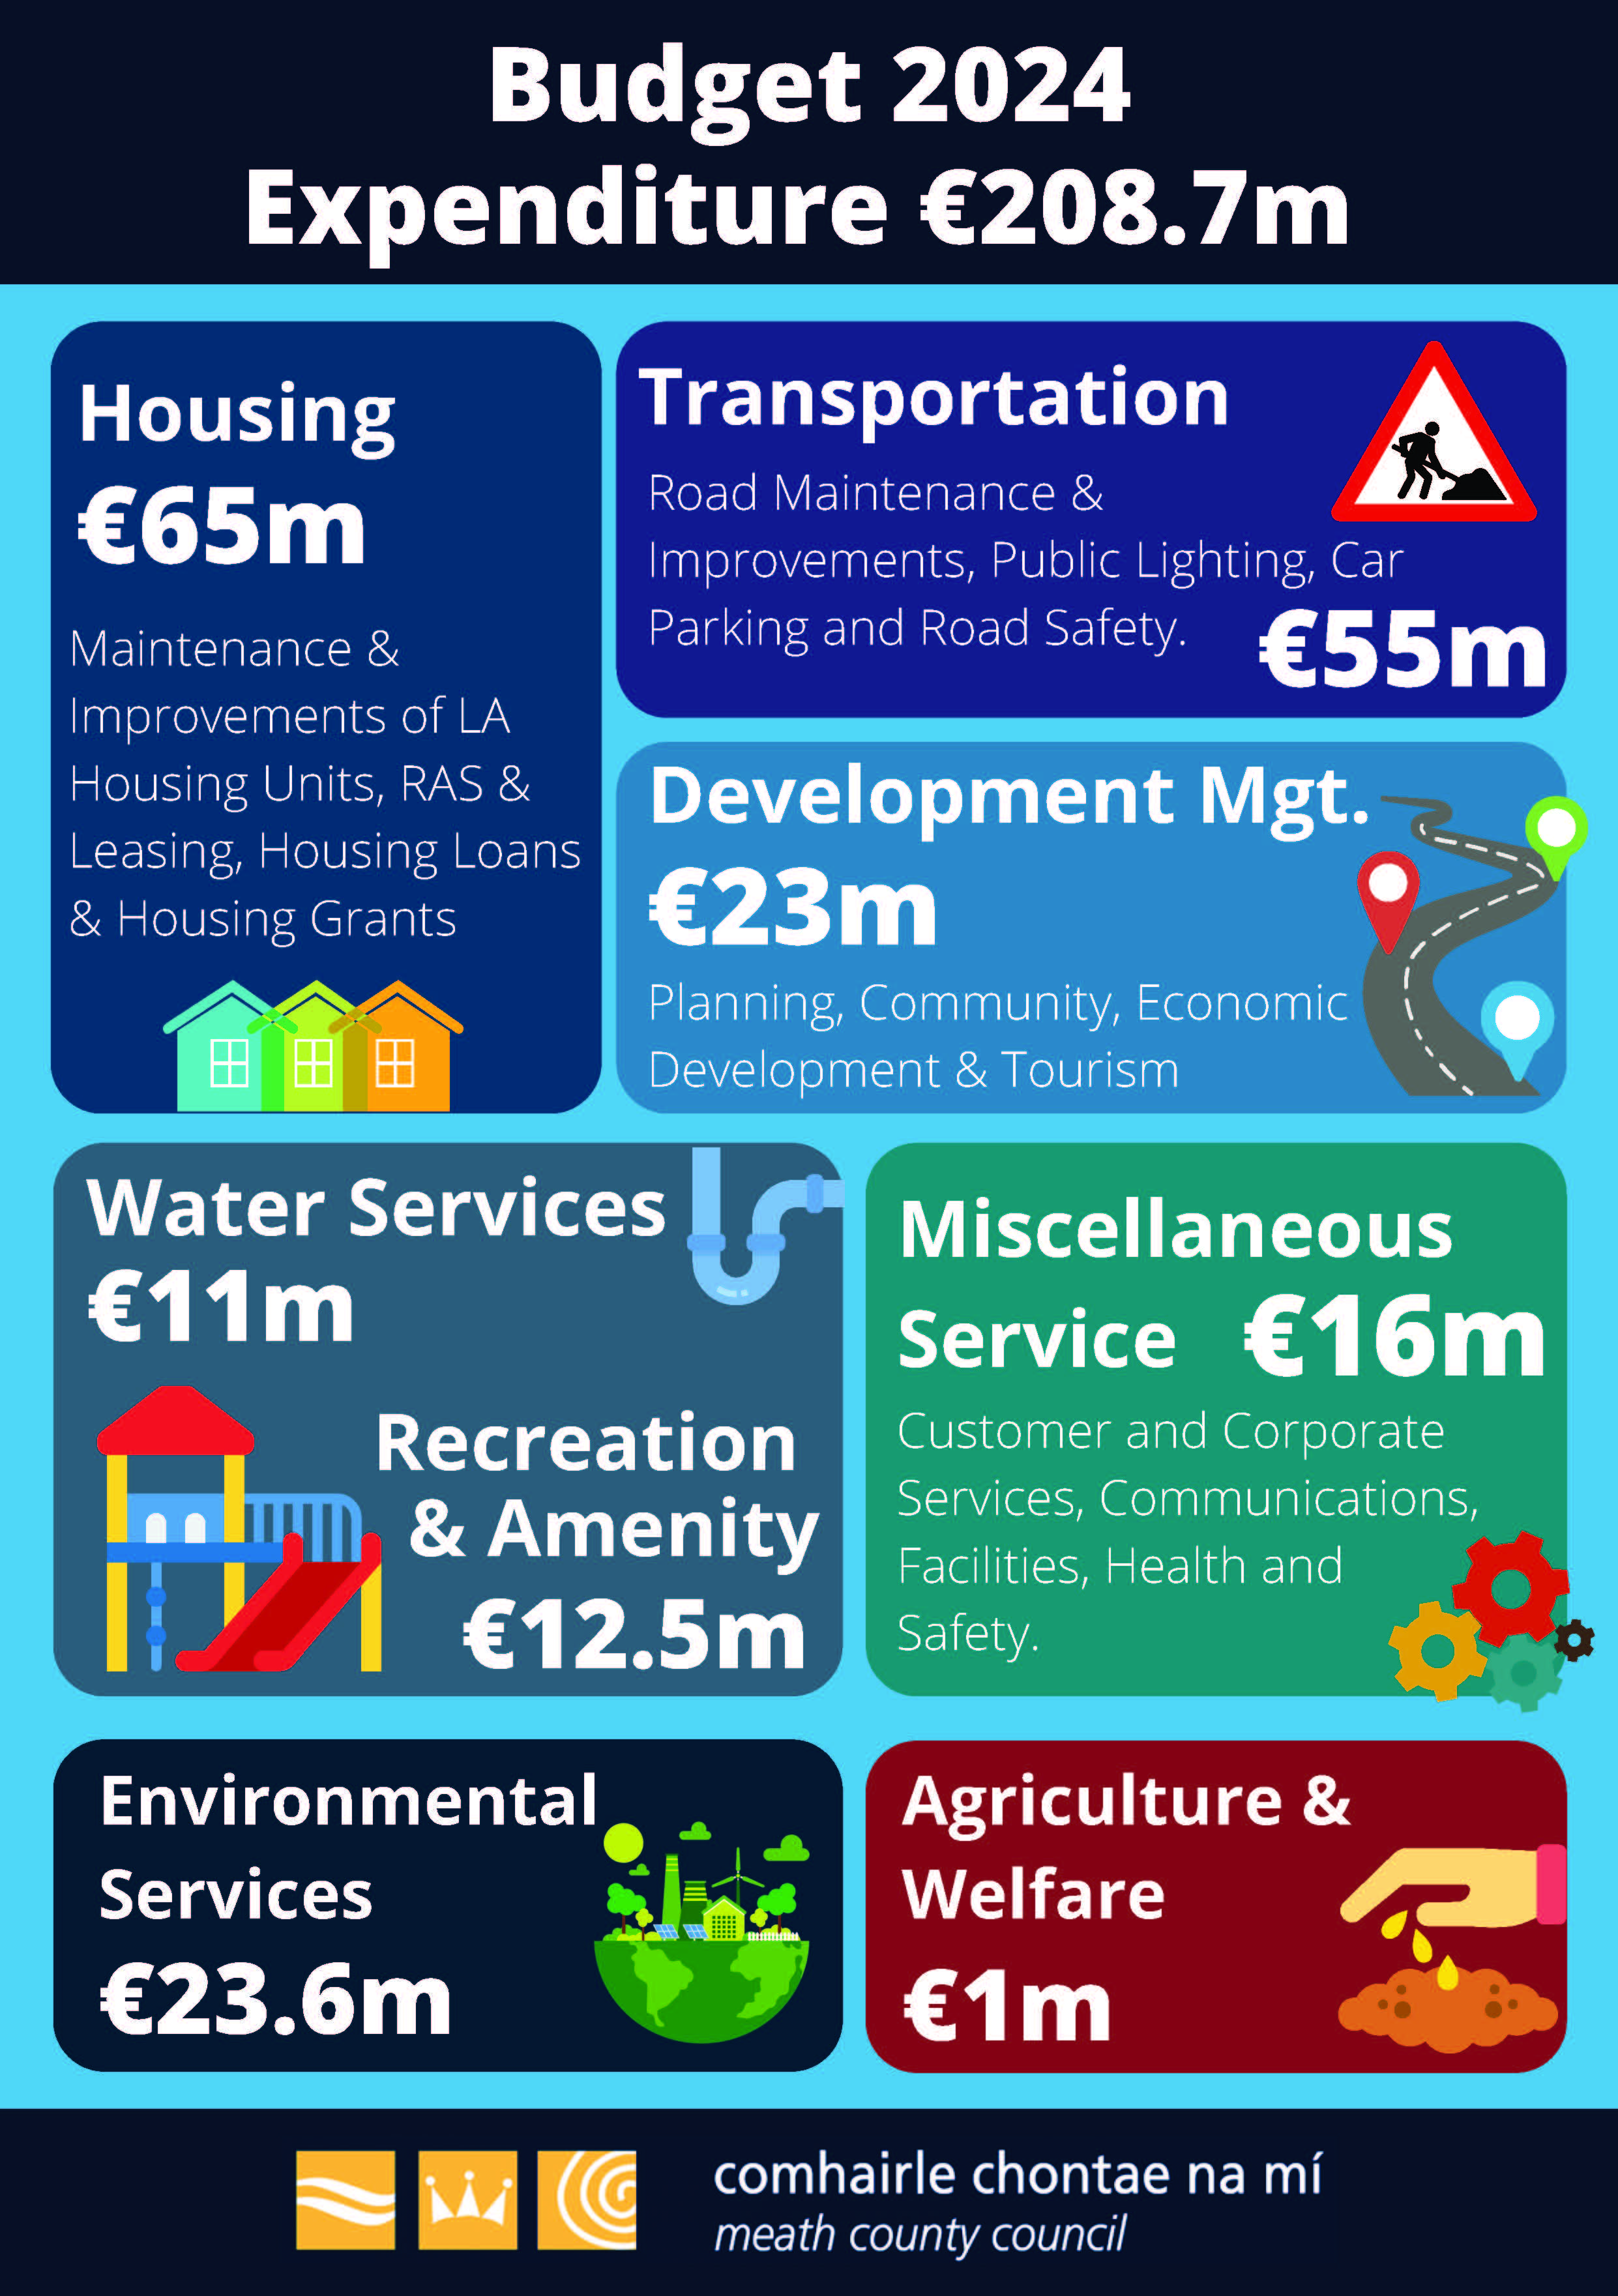 Infographic showing Budget Expenditure for 2024. Total €208.7m Housing €65m, Transport €55m, Development Management €23m, Water Services €11m. Rec reation and Amenity €12.5m, Environmental Science €23.6m, Agriculture and Welfare €1m, Miscellaneous Service (i.e. customer and corporate services, Communications, facilities, health and safety) €16m